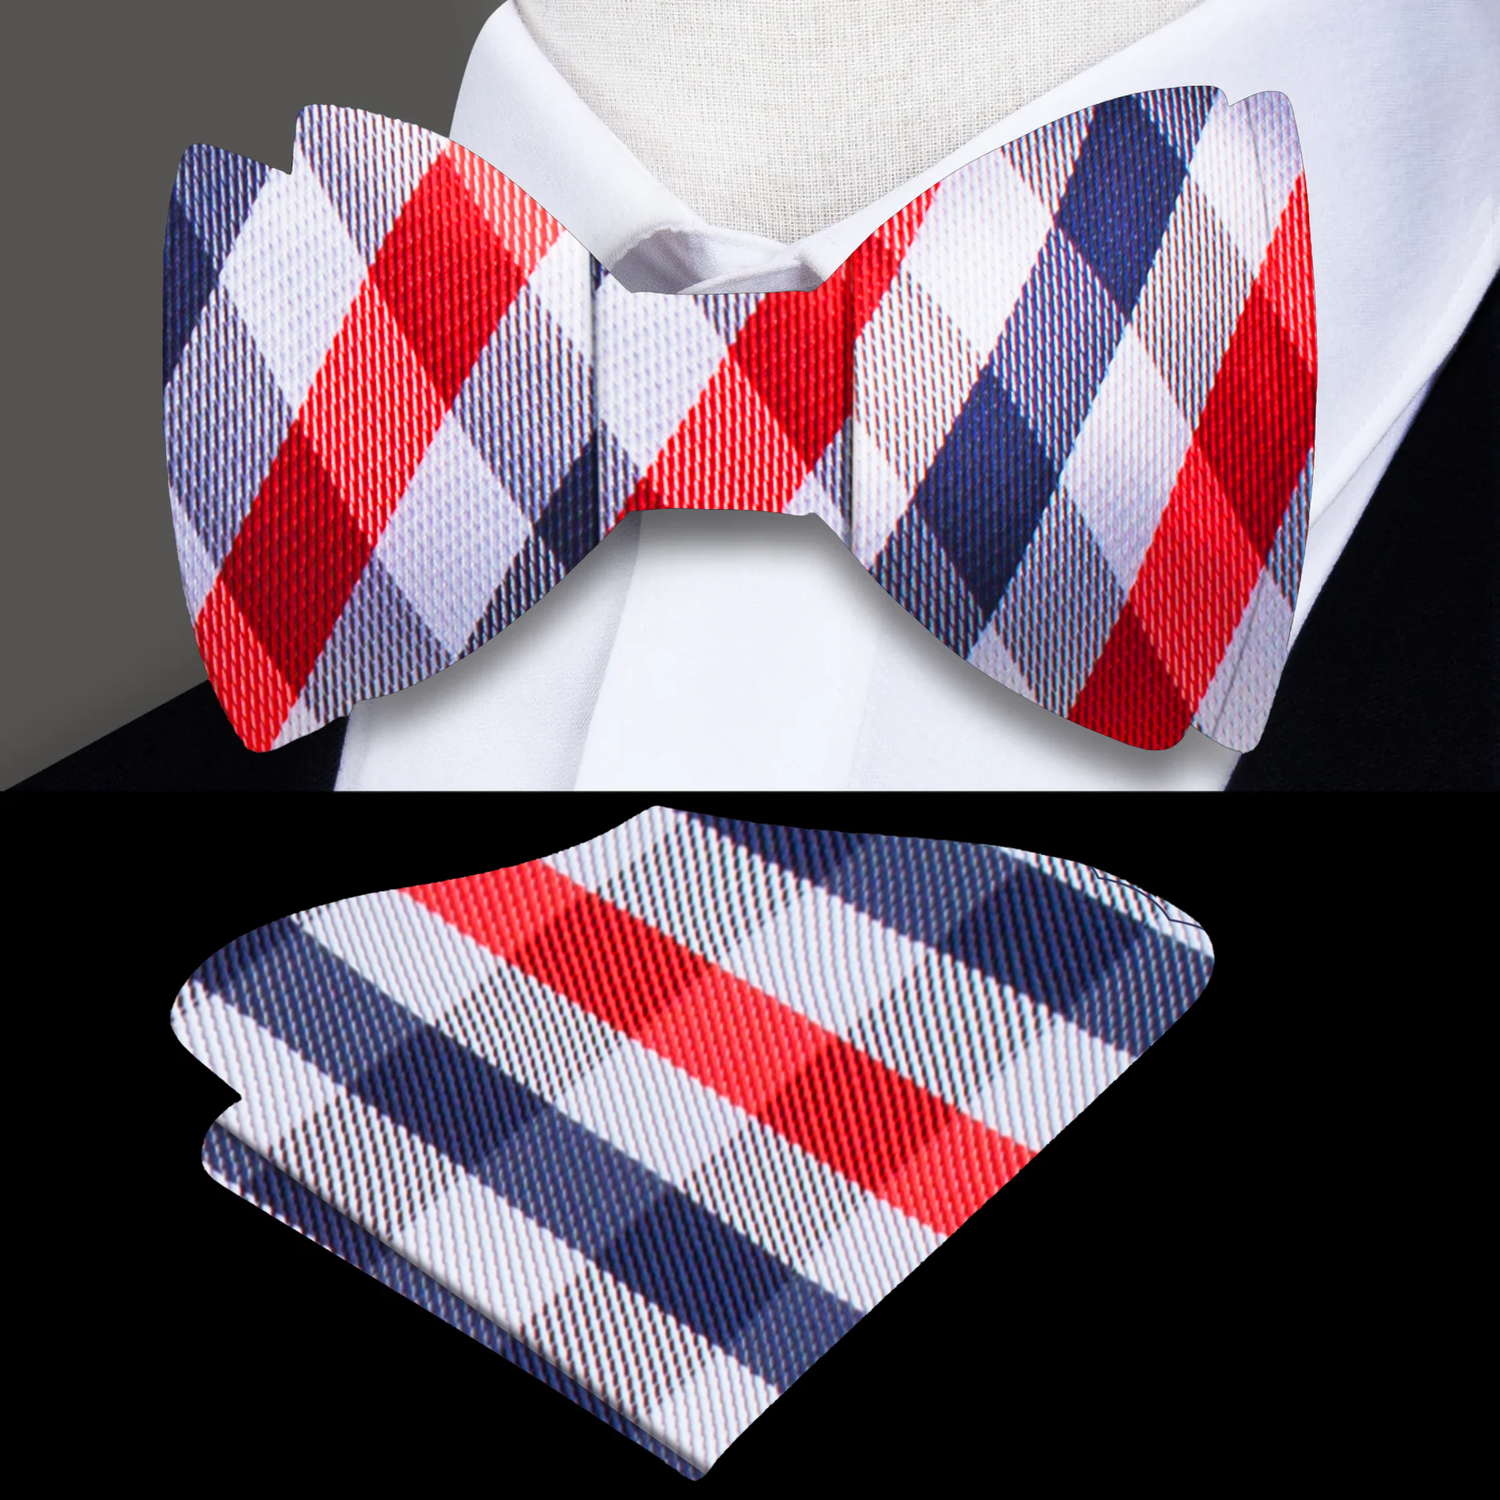 A Red, White, Blue Small Geometric Checker Pattern Silk Self Tie Bow Tie, With Matching Pocket Square